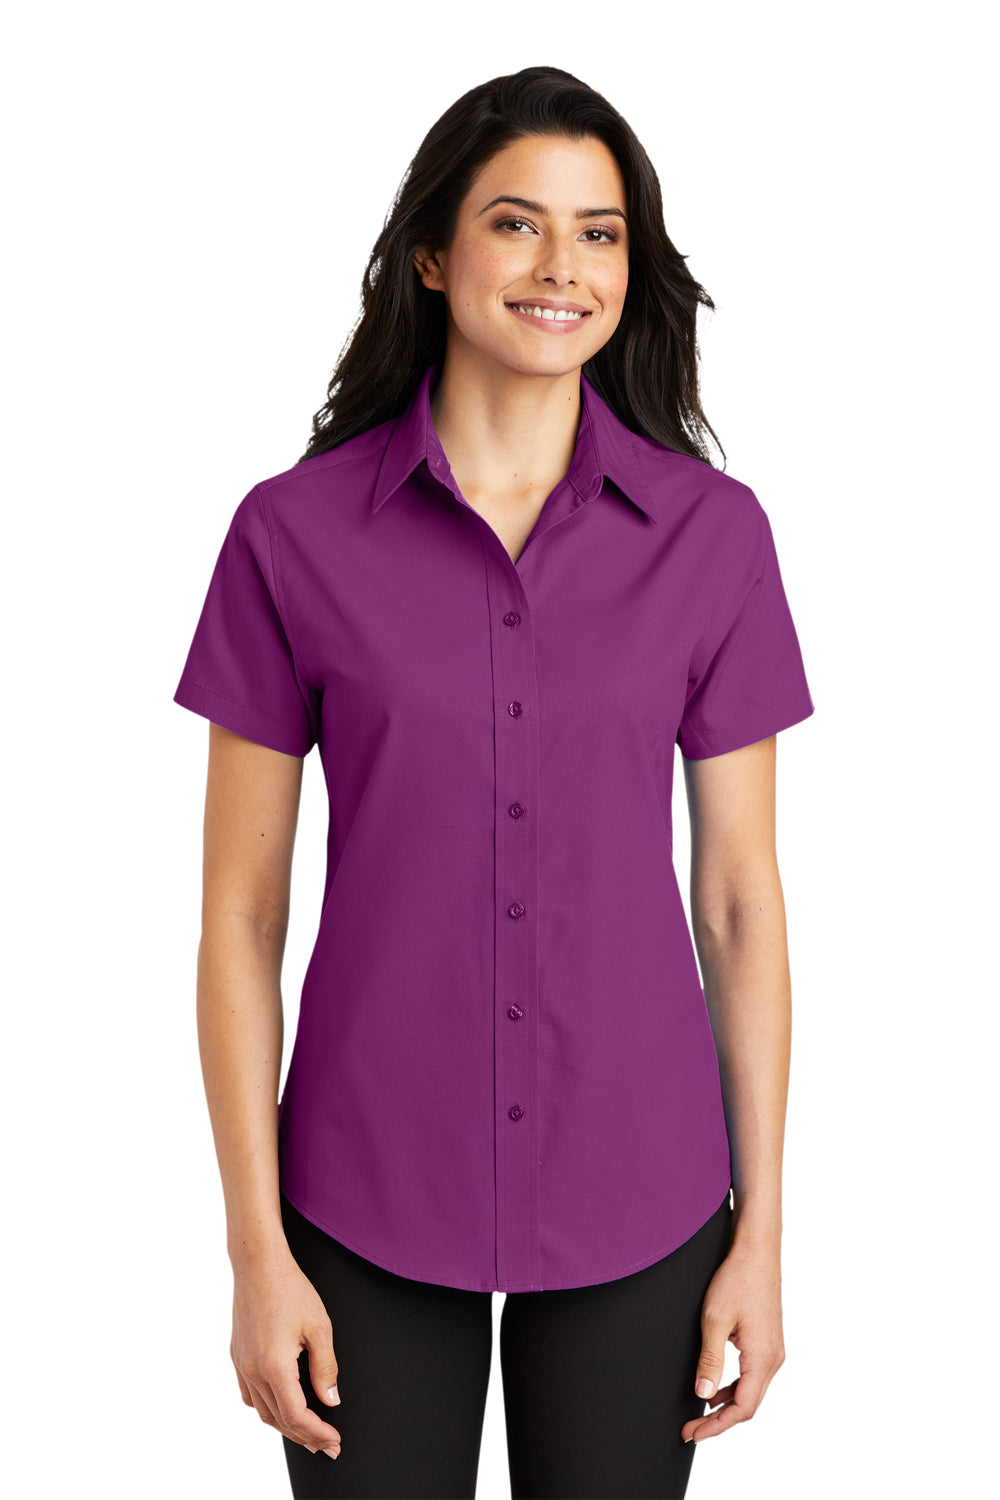 Port Authority L508 Womens Easy Care Wrinkle Resistant Short Sleeve Button Down Shirt Deep Berry Purple Front